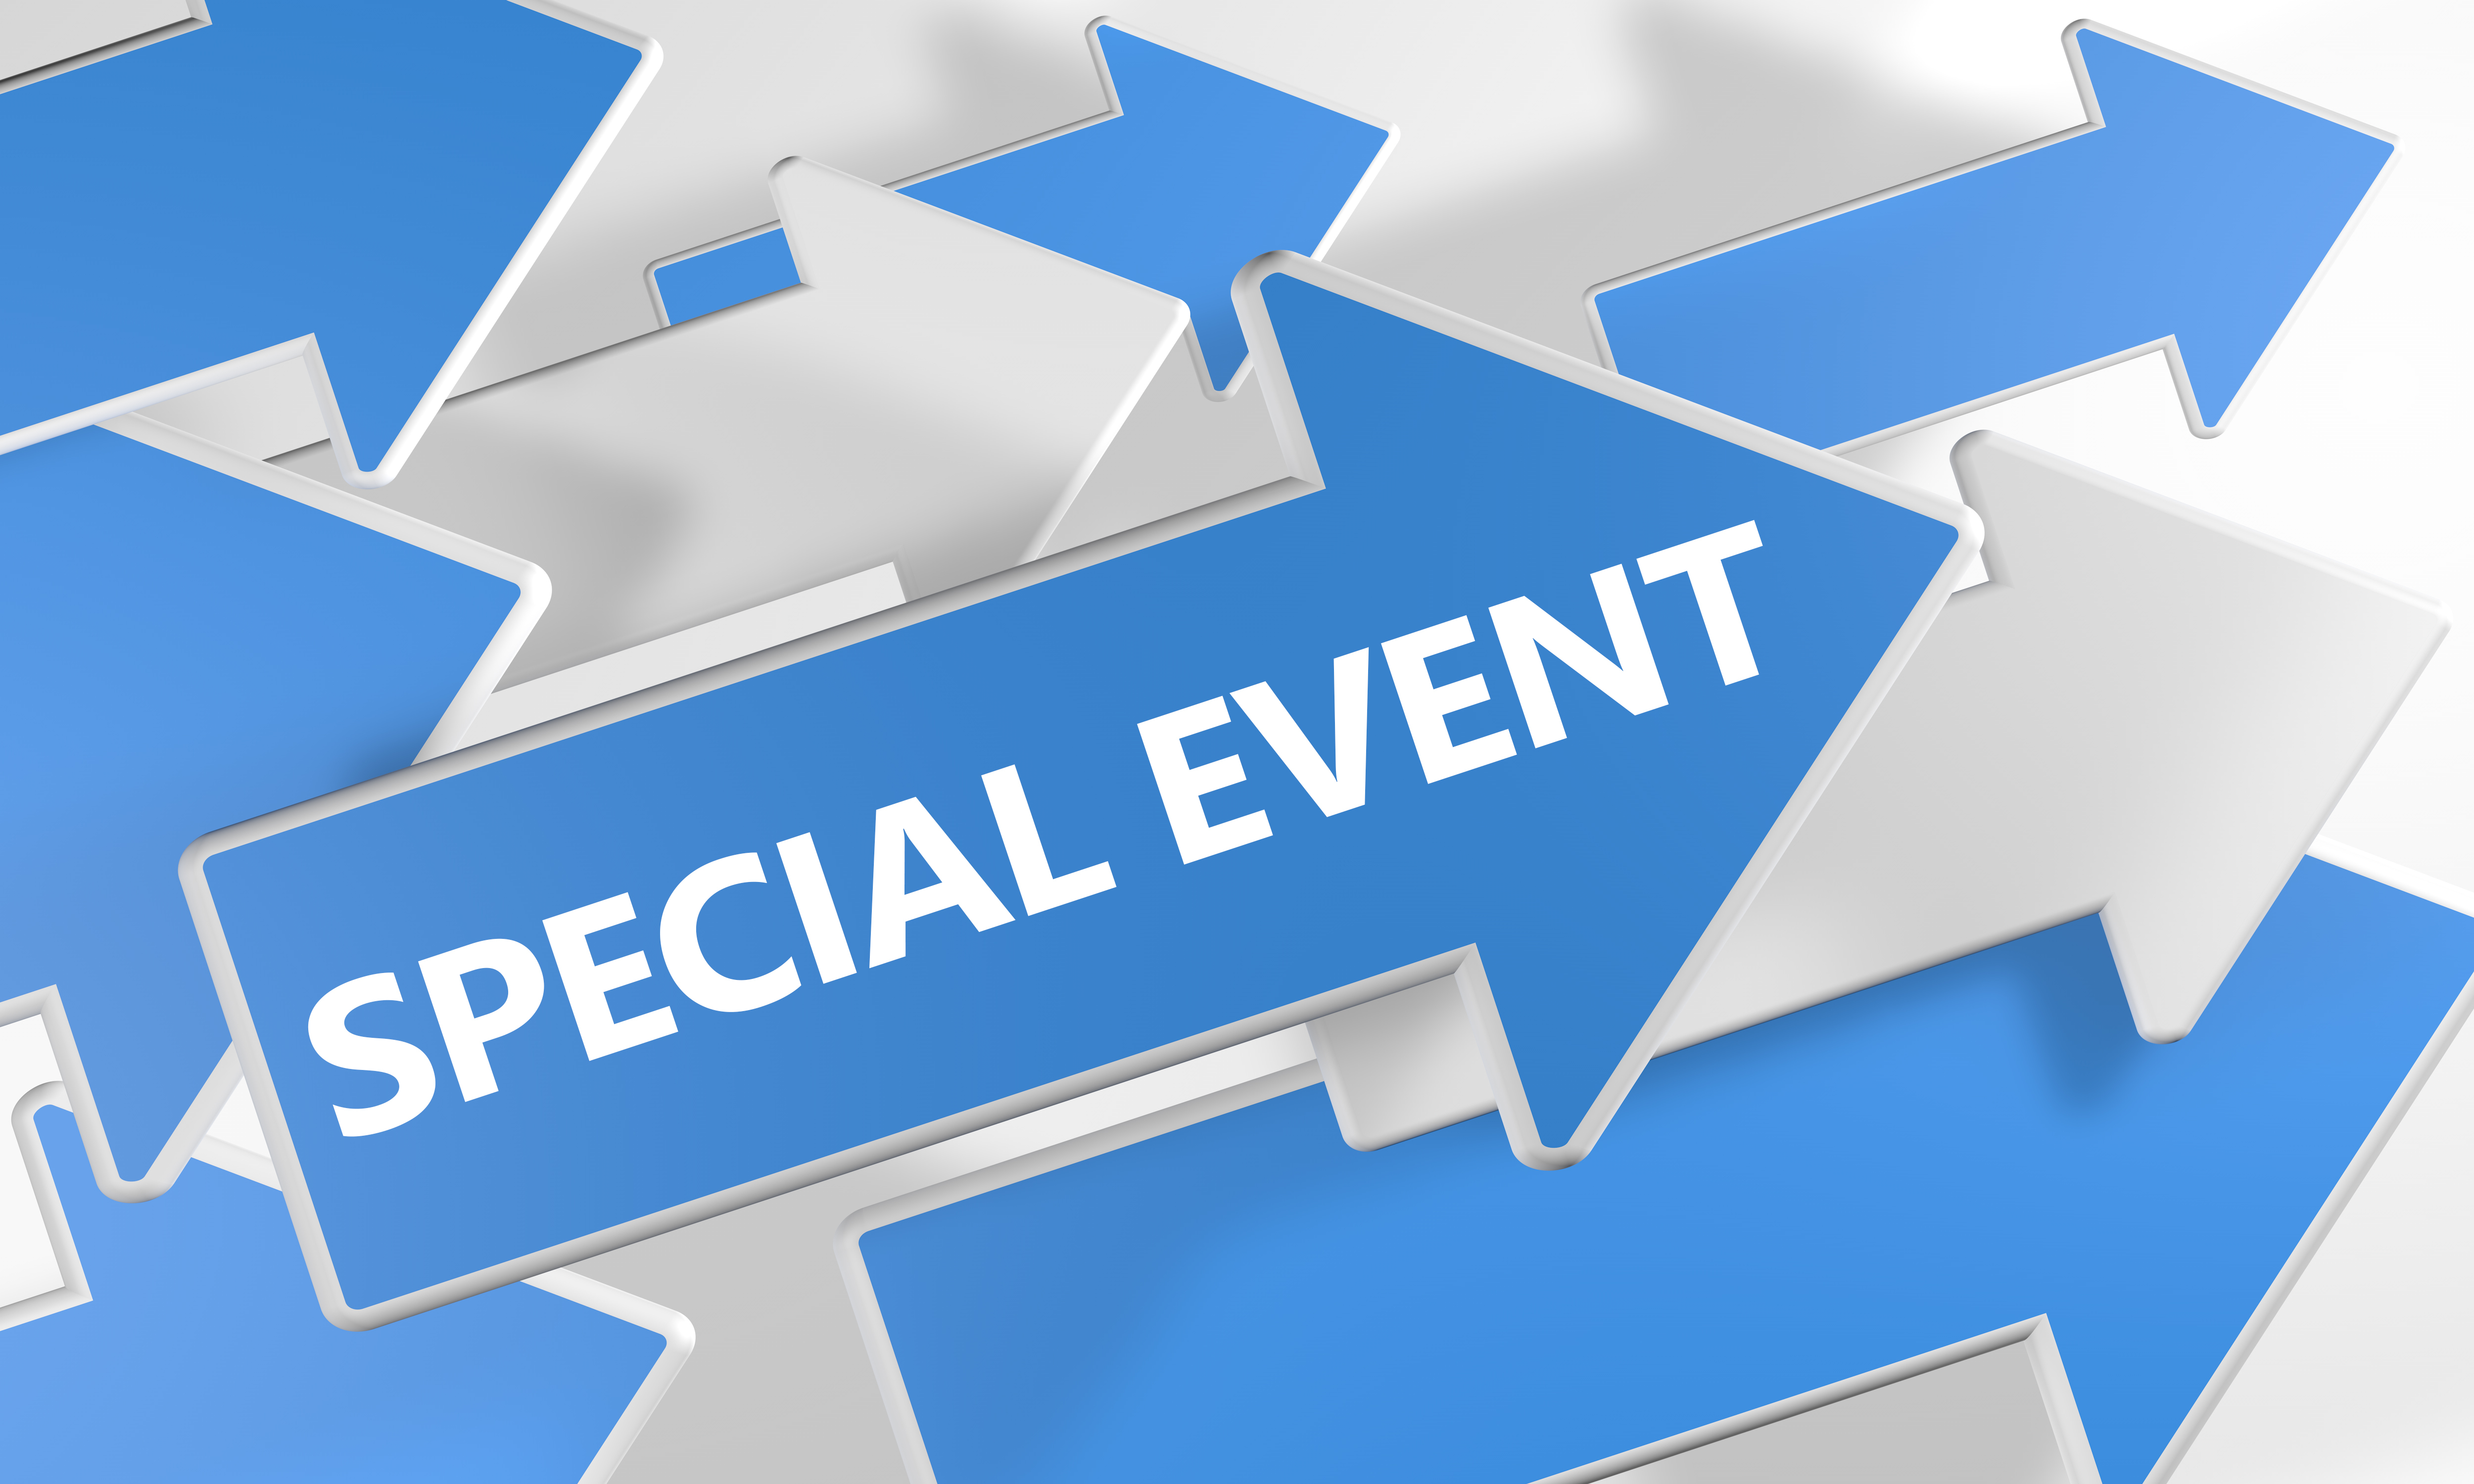 Blue and gray arrows with the words "Special Event" in one of the prominent arrows